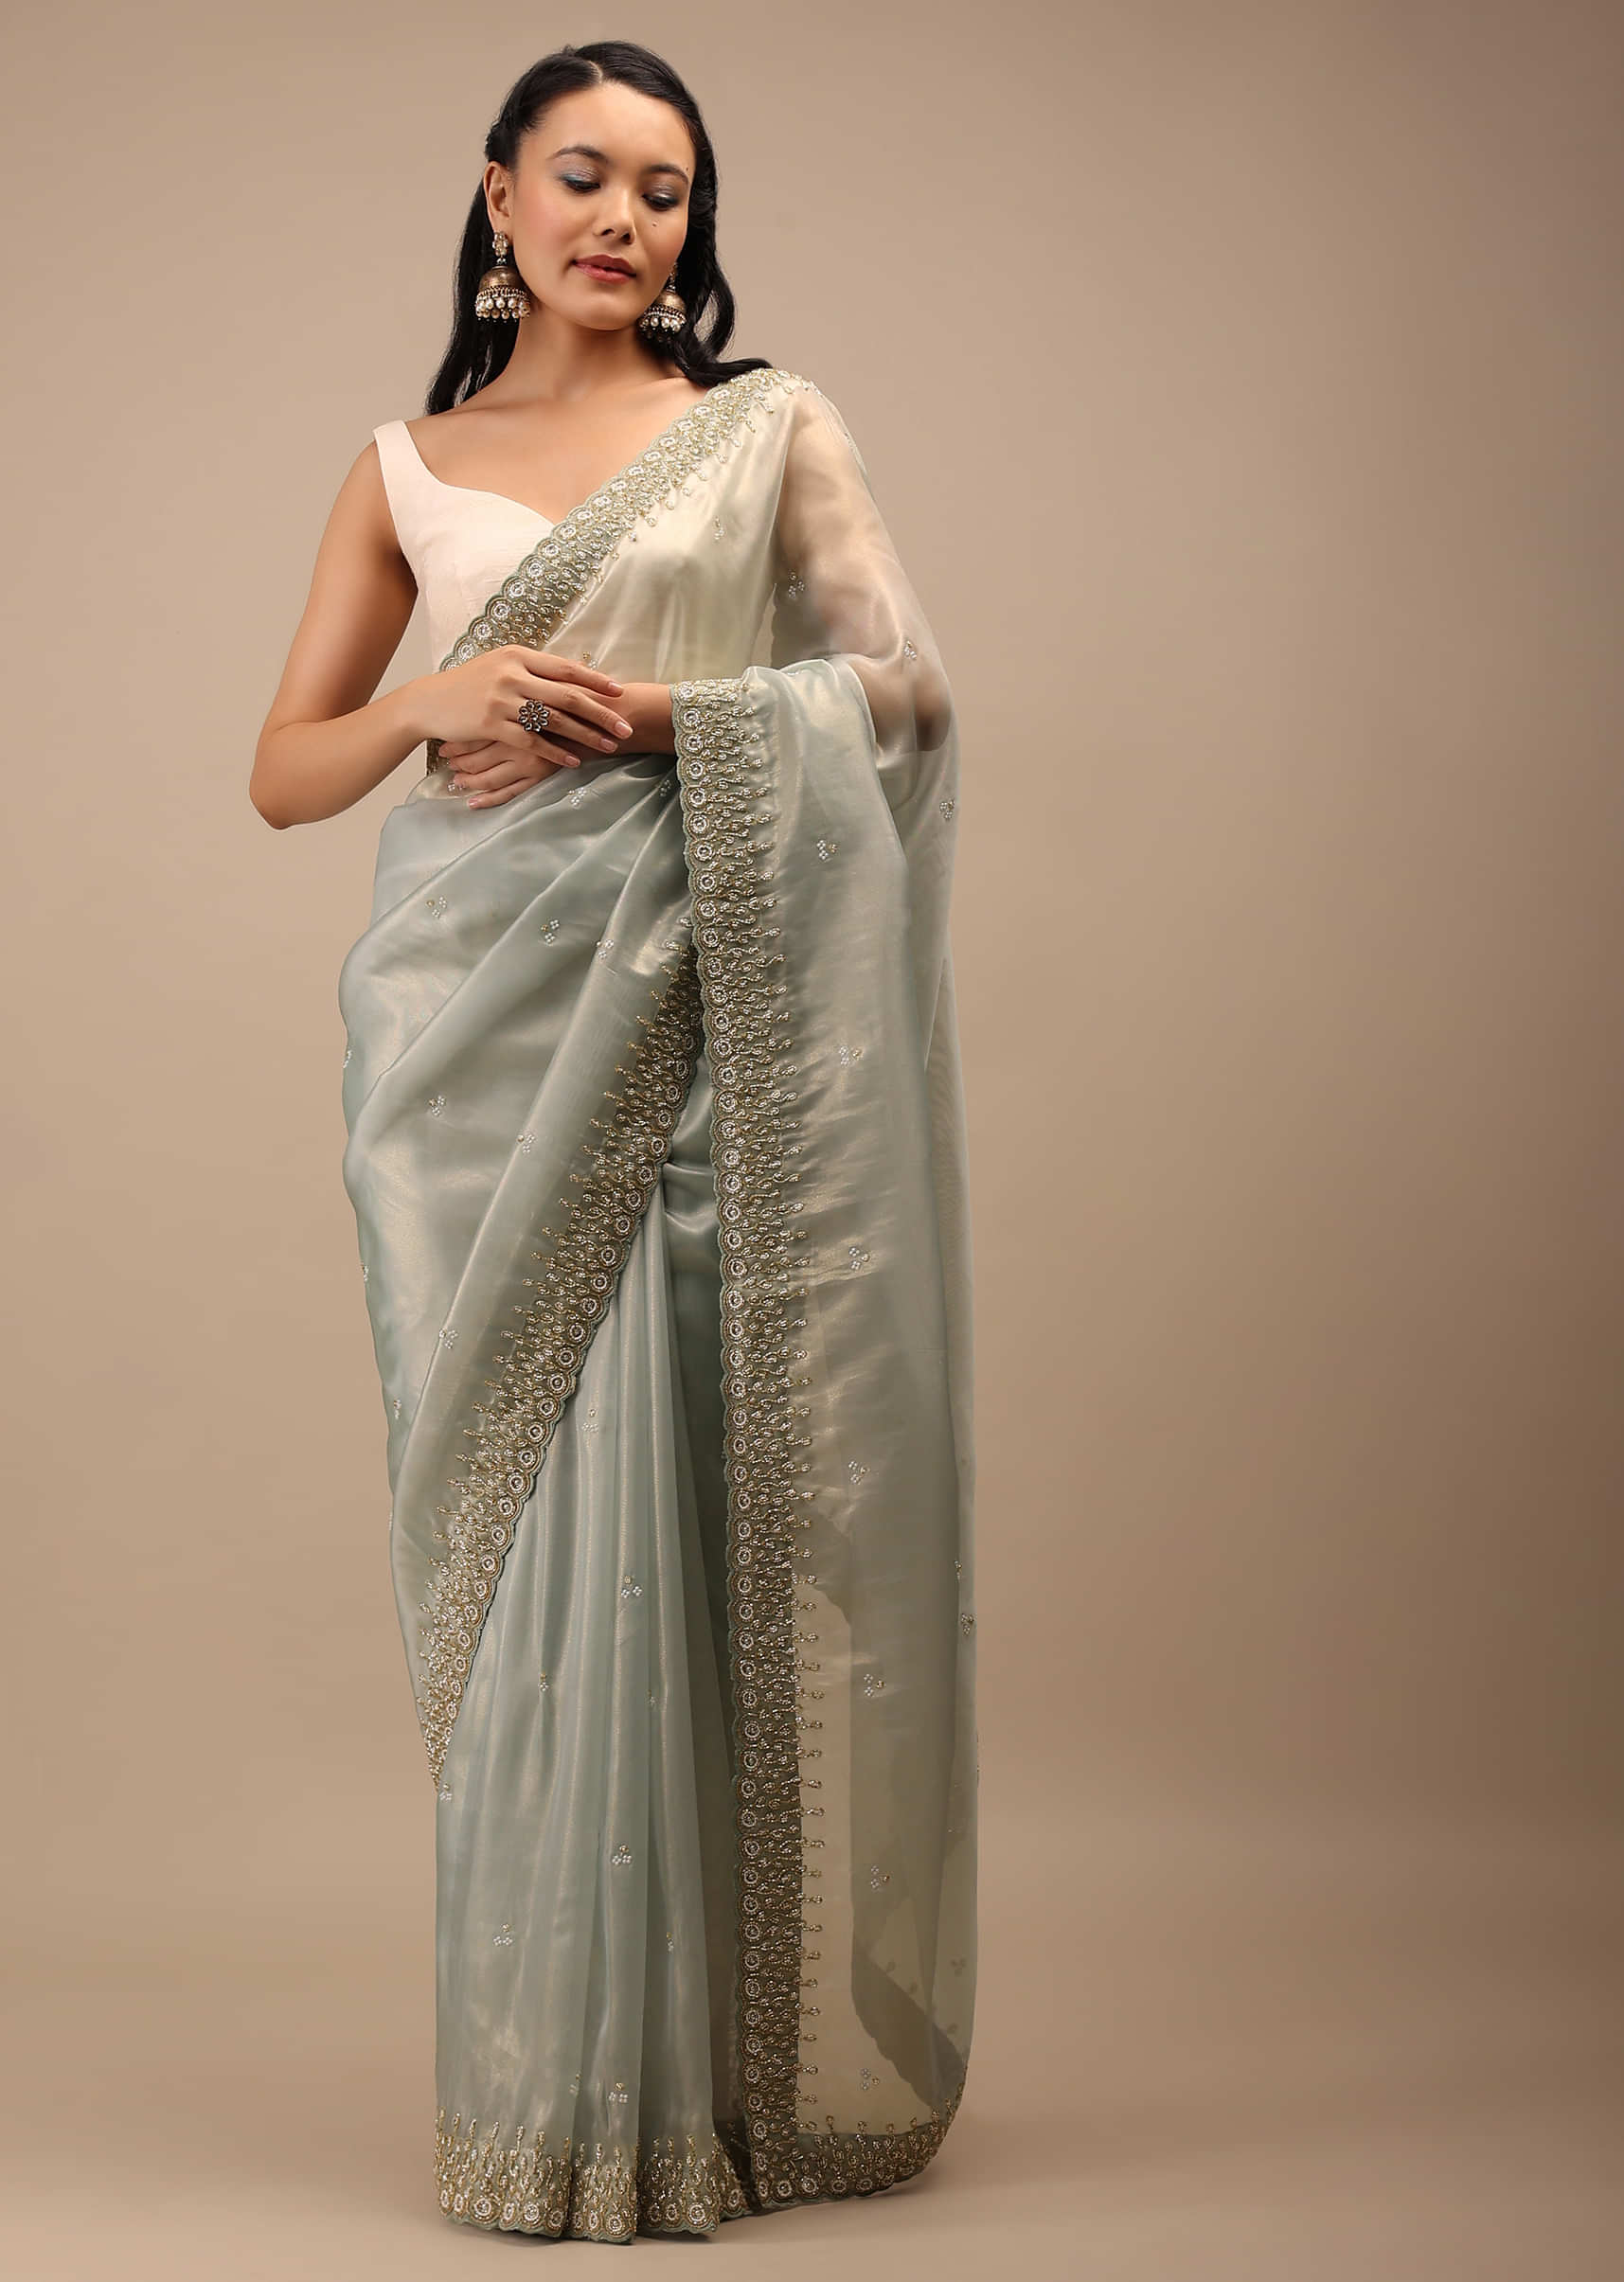 Green Tint Organza Saree In White Moti Cut Dana, And Beads Embroidery Buttis, Leafy Embroidery Detailing On The Border